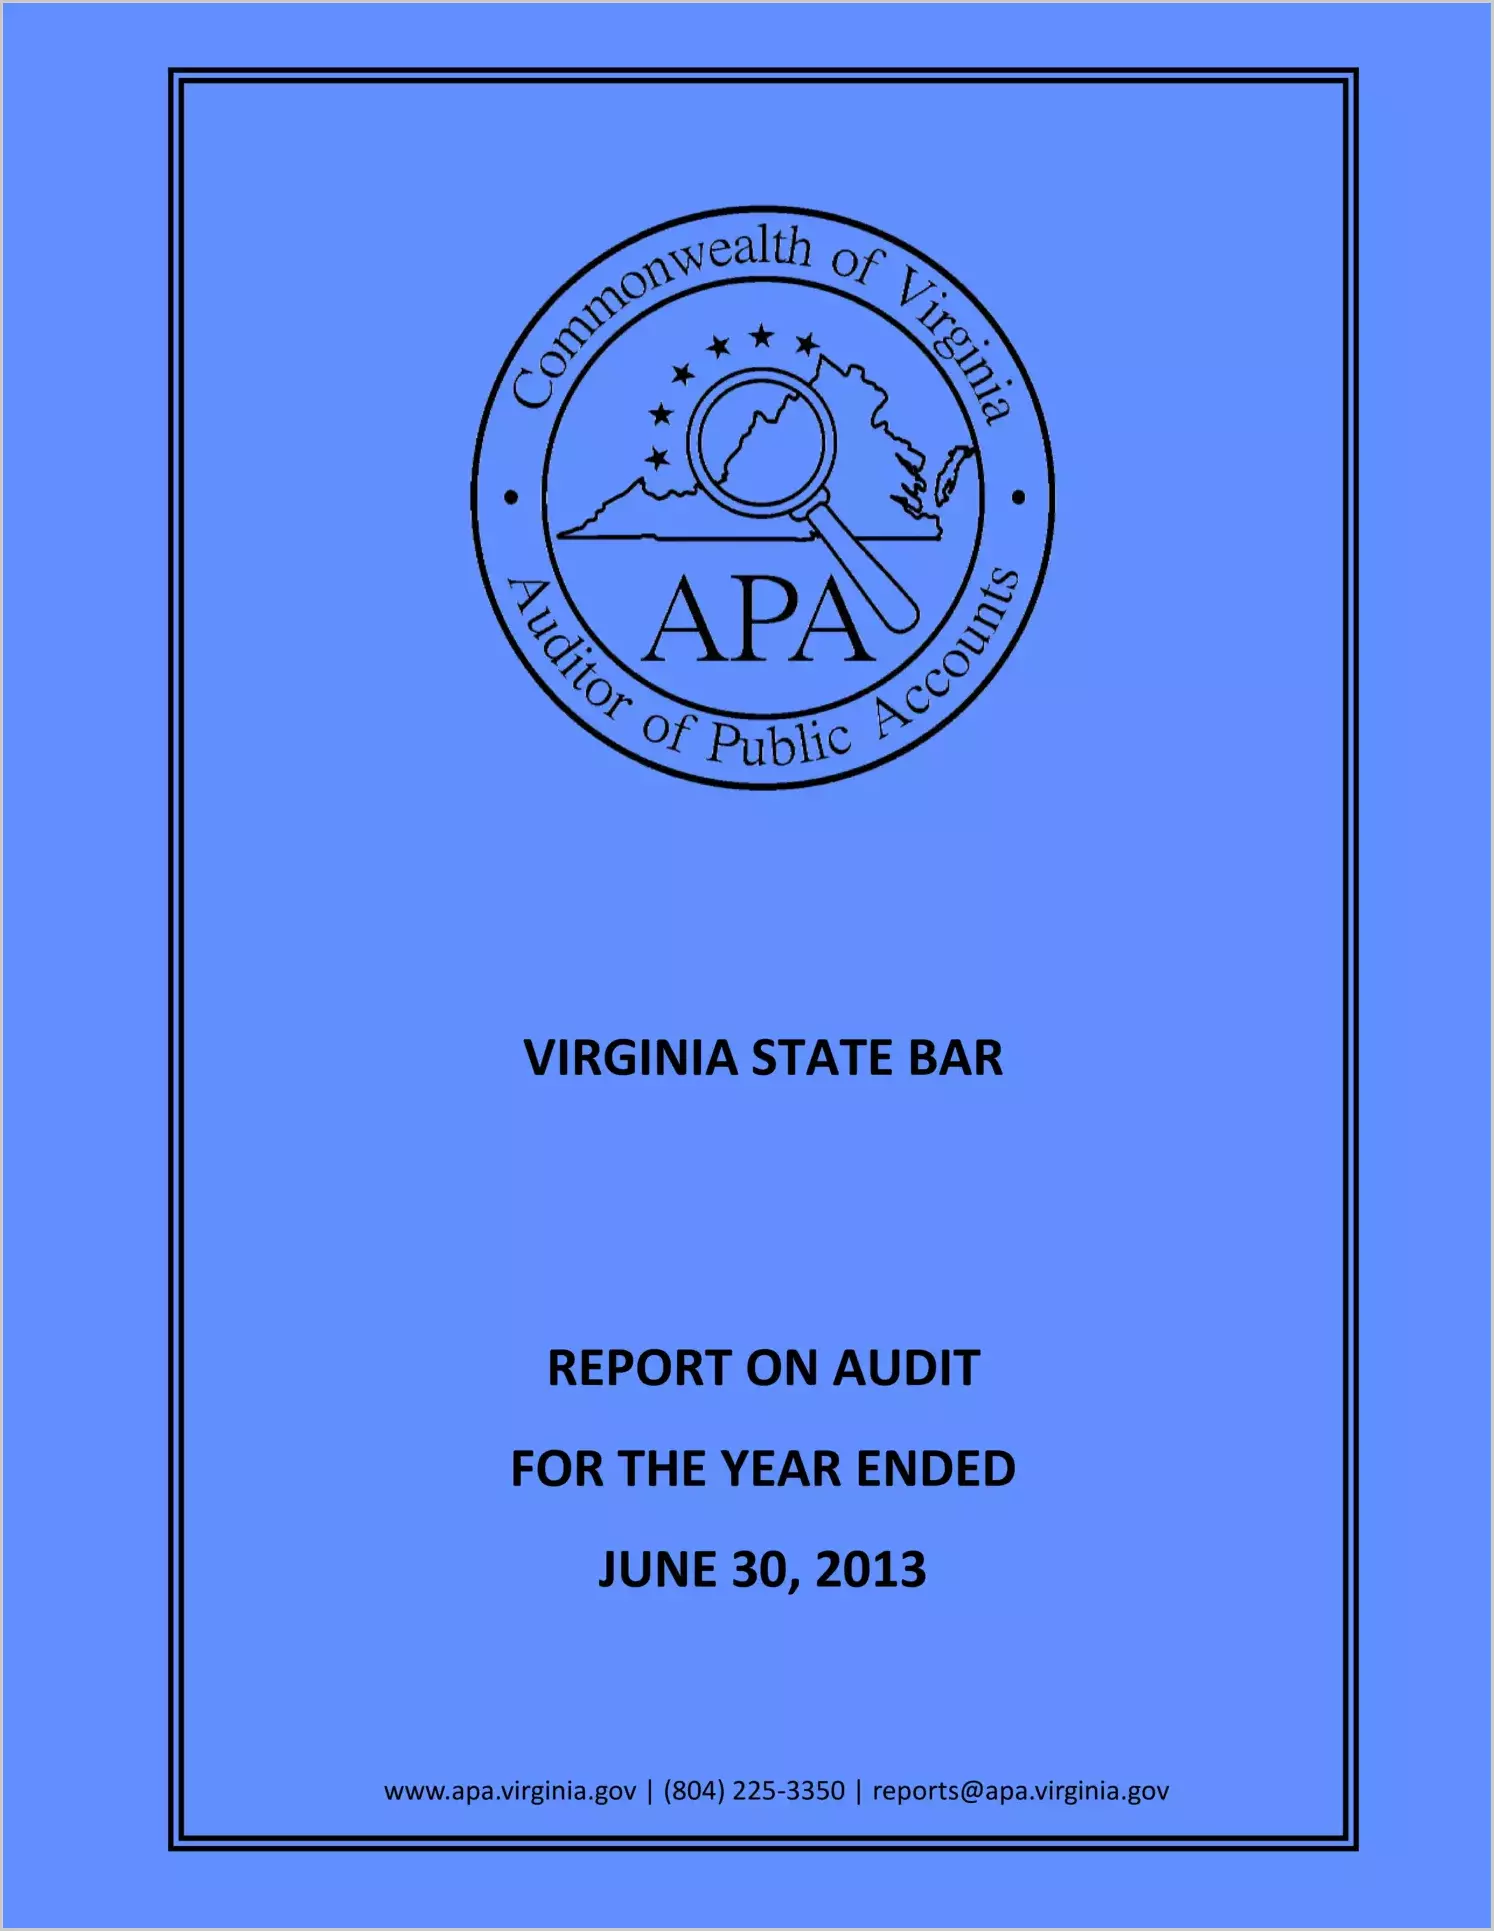 Virginia State Bar for the year ended June 30, 2013